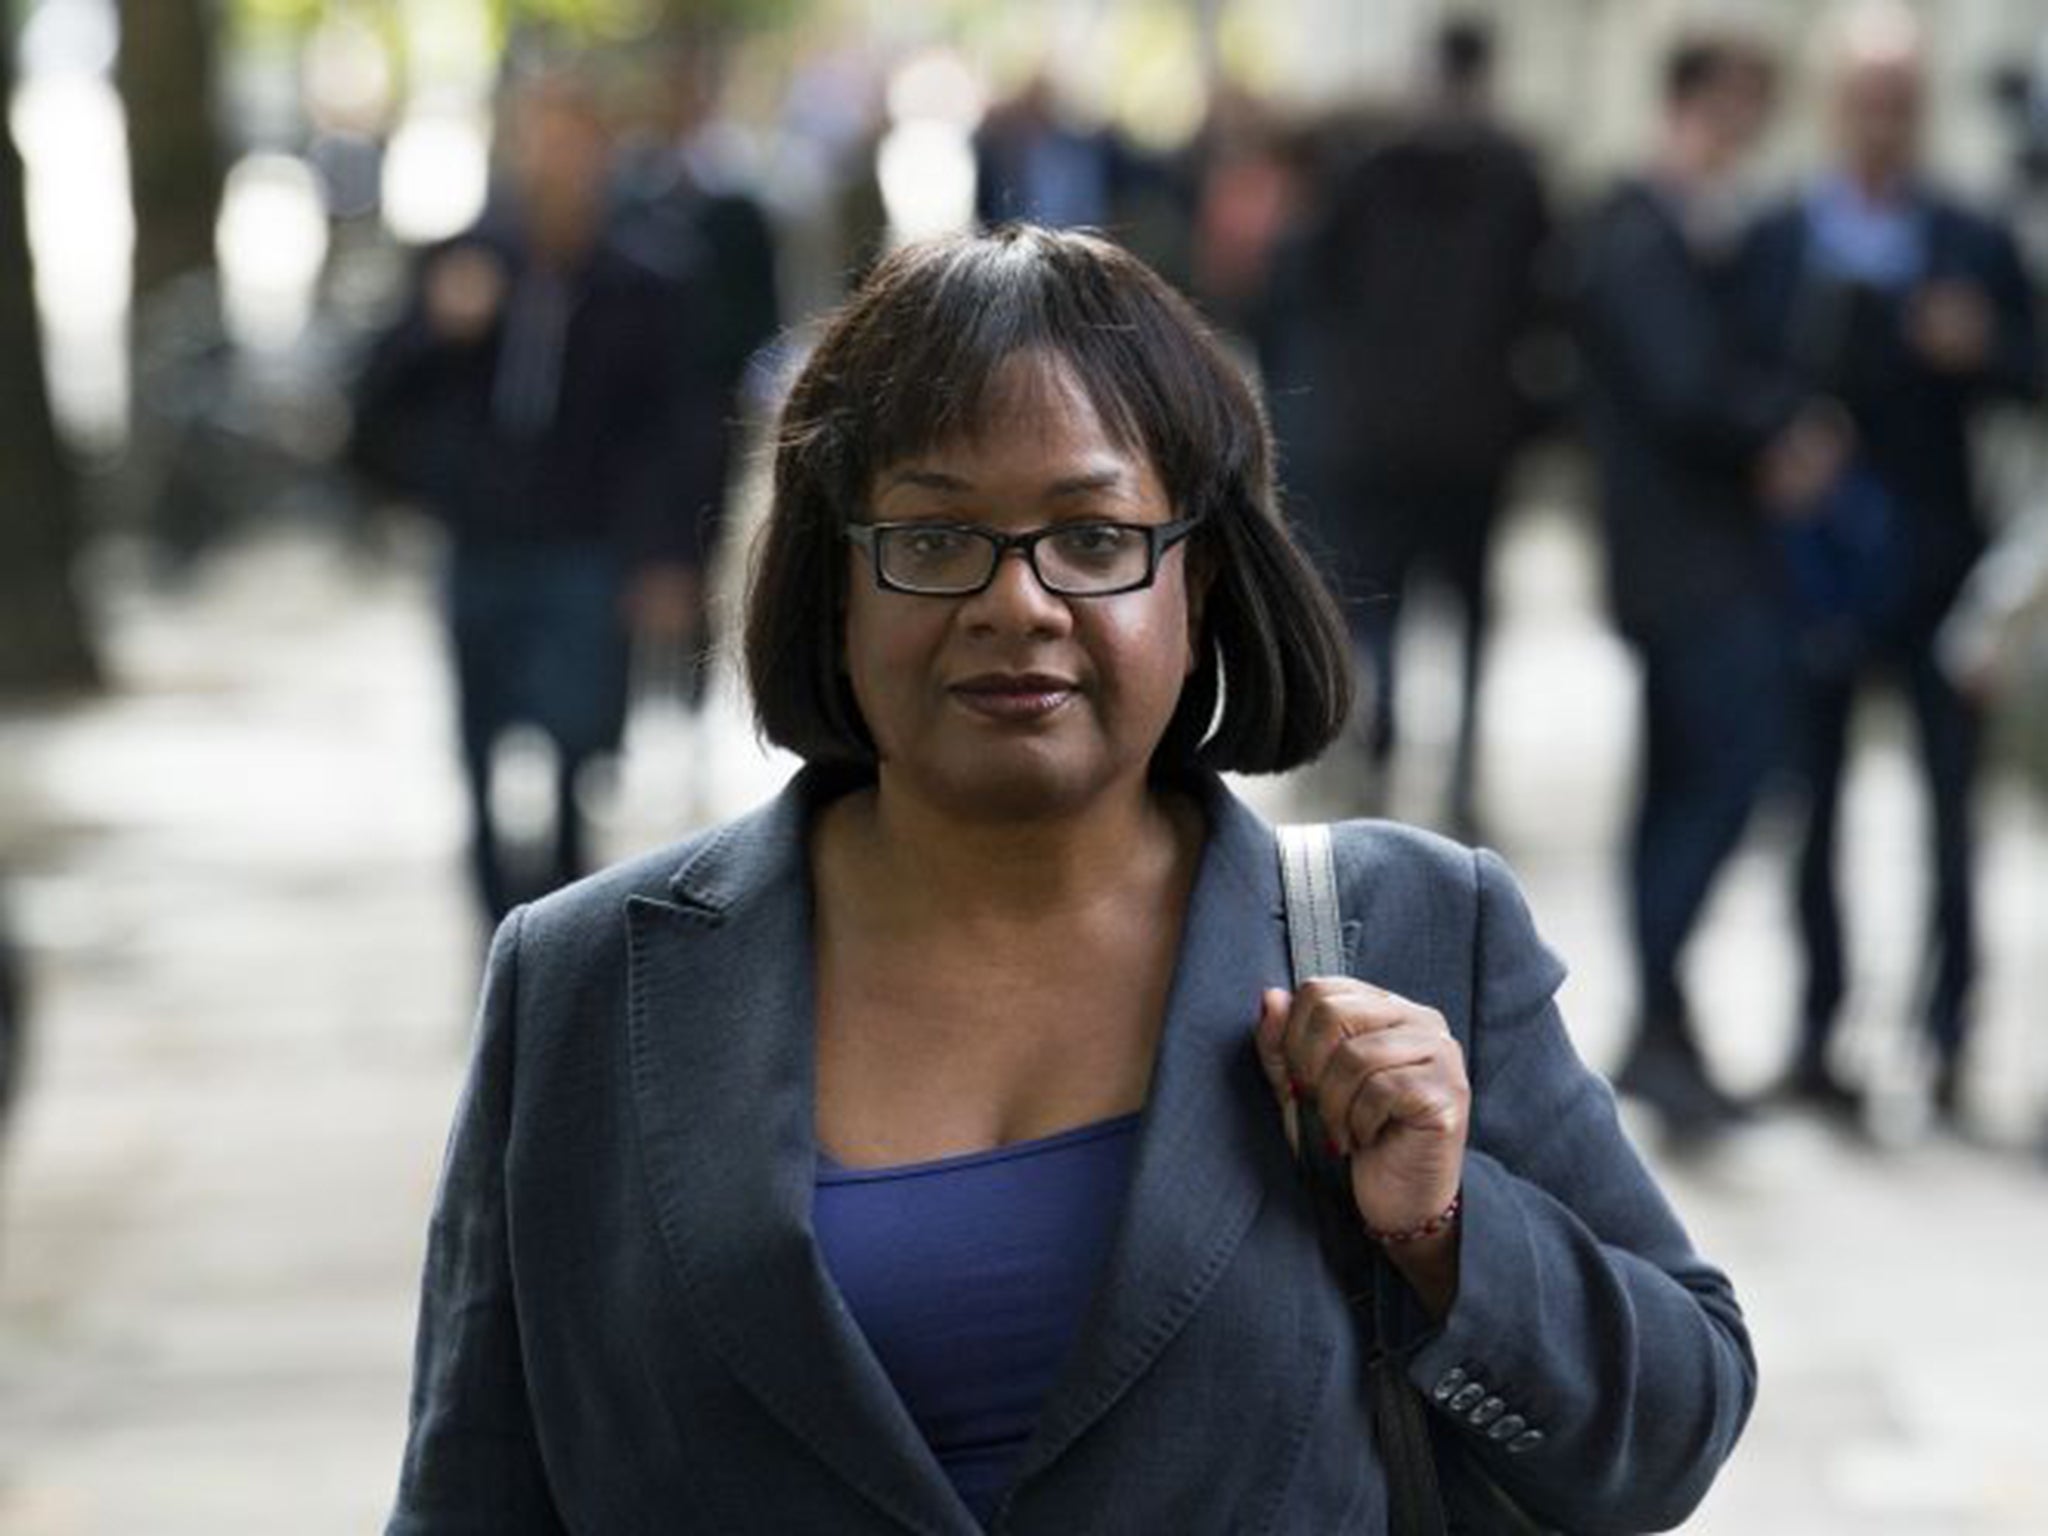 Diane Abbott copes with atrocious abuse, consciously wicked and unthinkingly poisonous, with dignified bravery